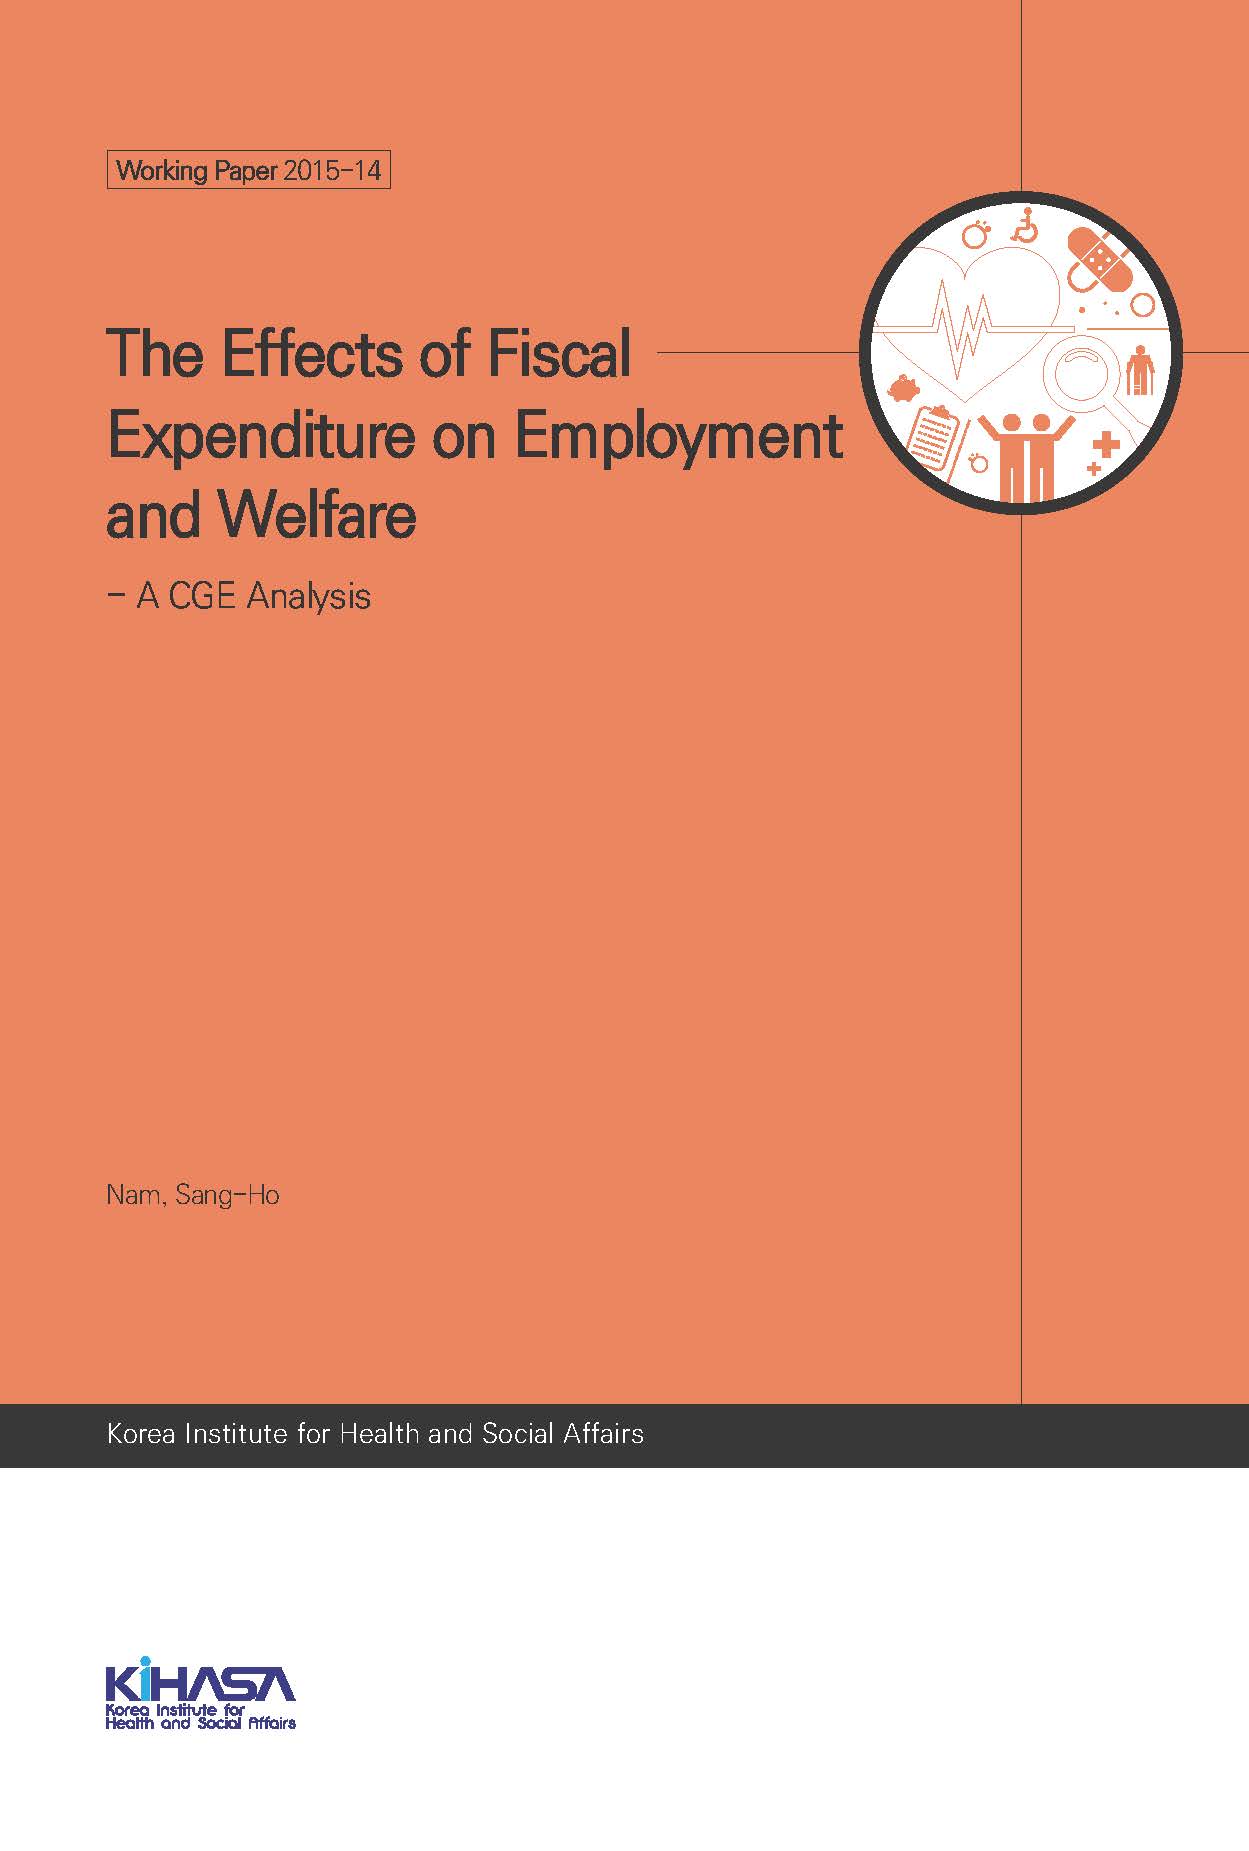 The Effects of Fiscal Expenditure on Employment and Welfare - A CGE Analysis